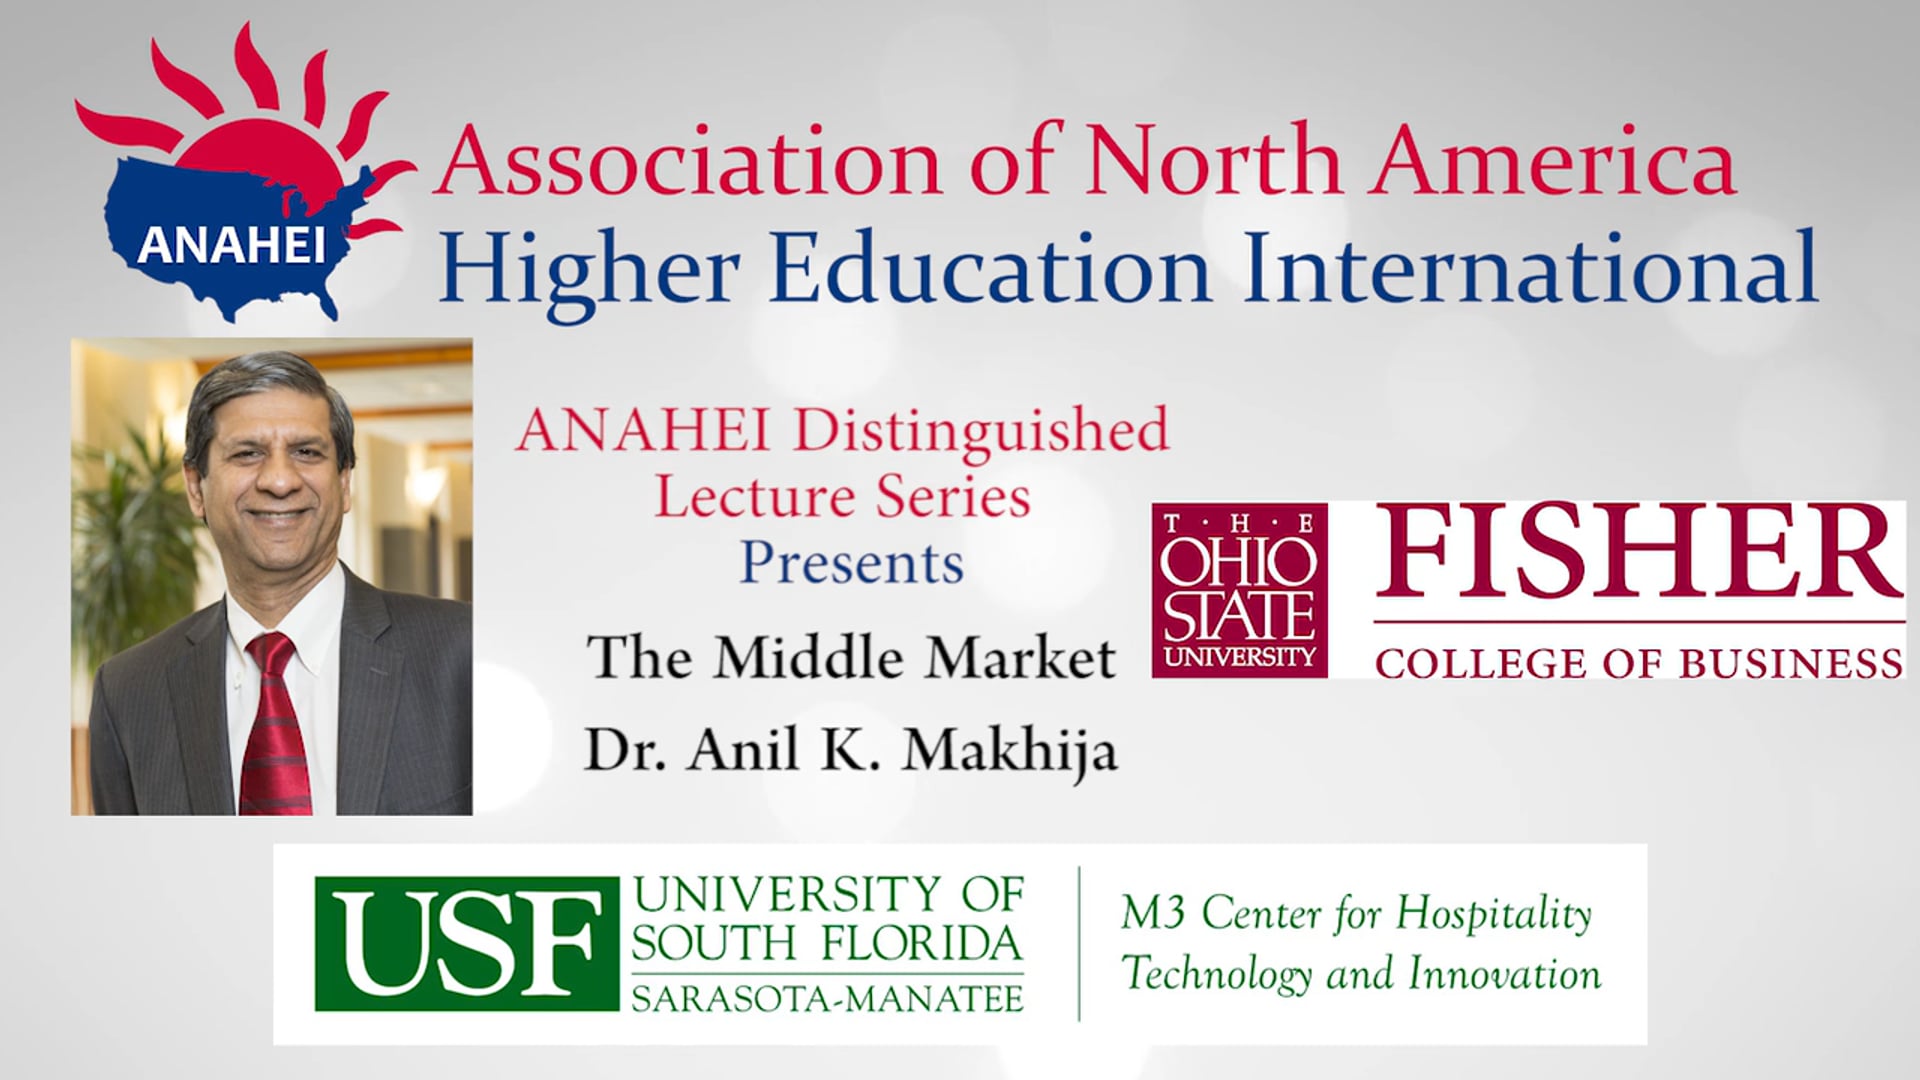 ANAHEI Distinguished Lecture Series: Dr. Anil K. Makhija